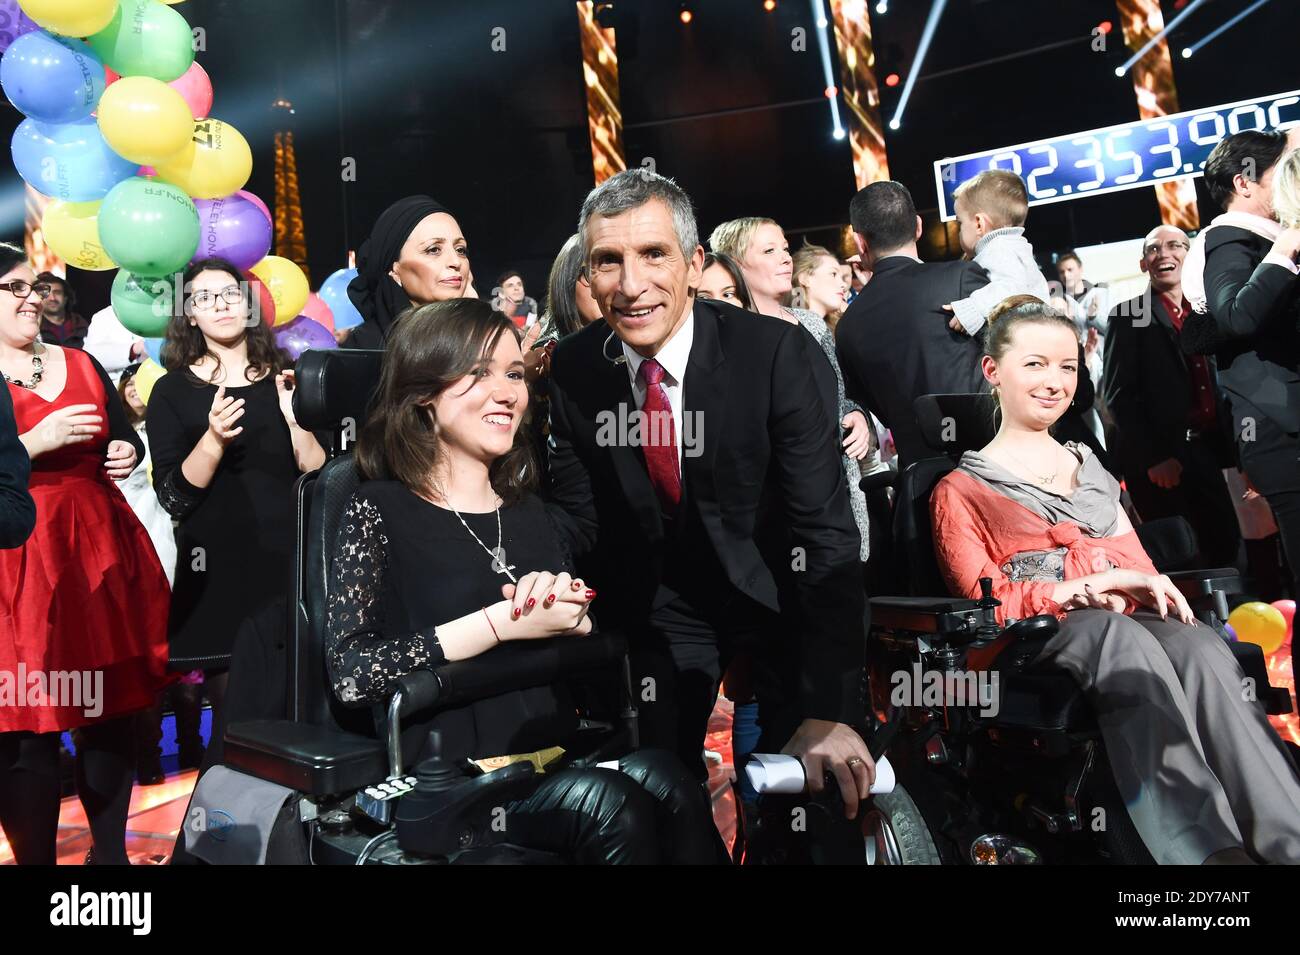 Nagui attending the 28th Telethon, France's biggest annual fund-raising event with 30 hours of live television transmission, on December 6, 2014 in Paris, France. The event aims to collect funds for research on genetic diseases such as myopathy, a neuromuscular disease. Photo by Nicolas Gouhier / ABACAPRESS.COM Stock Photo